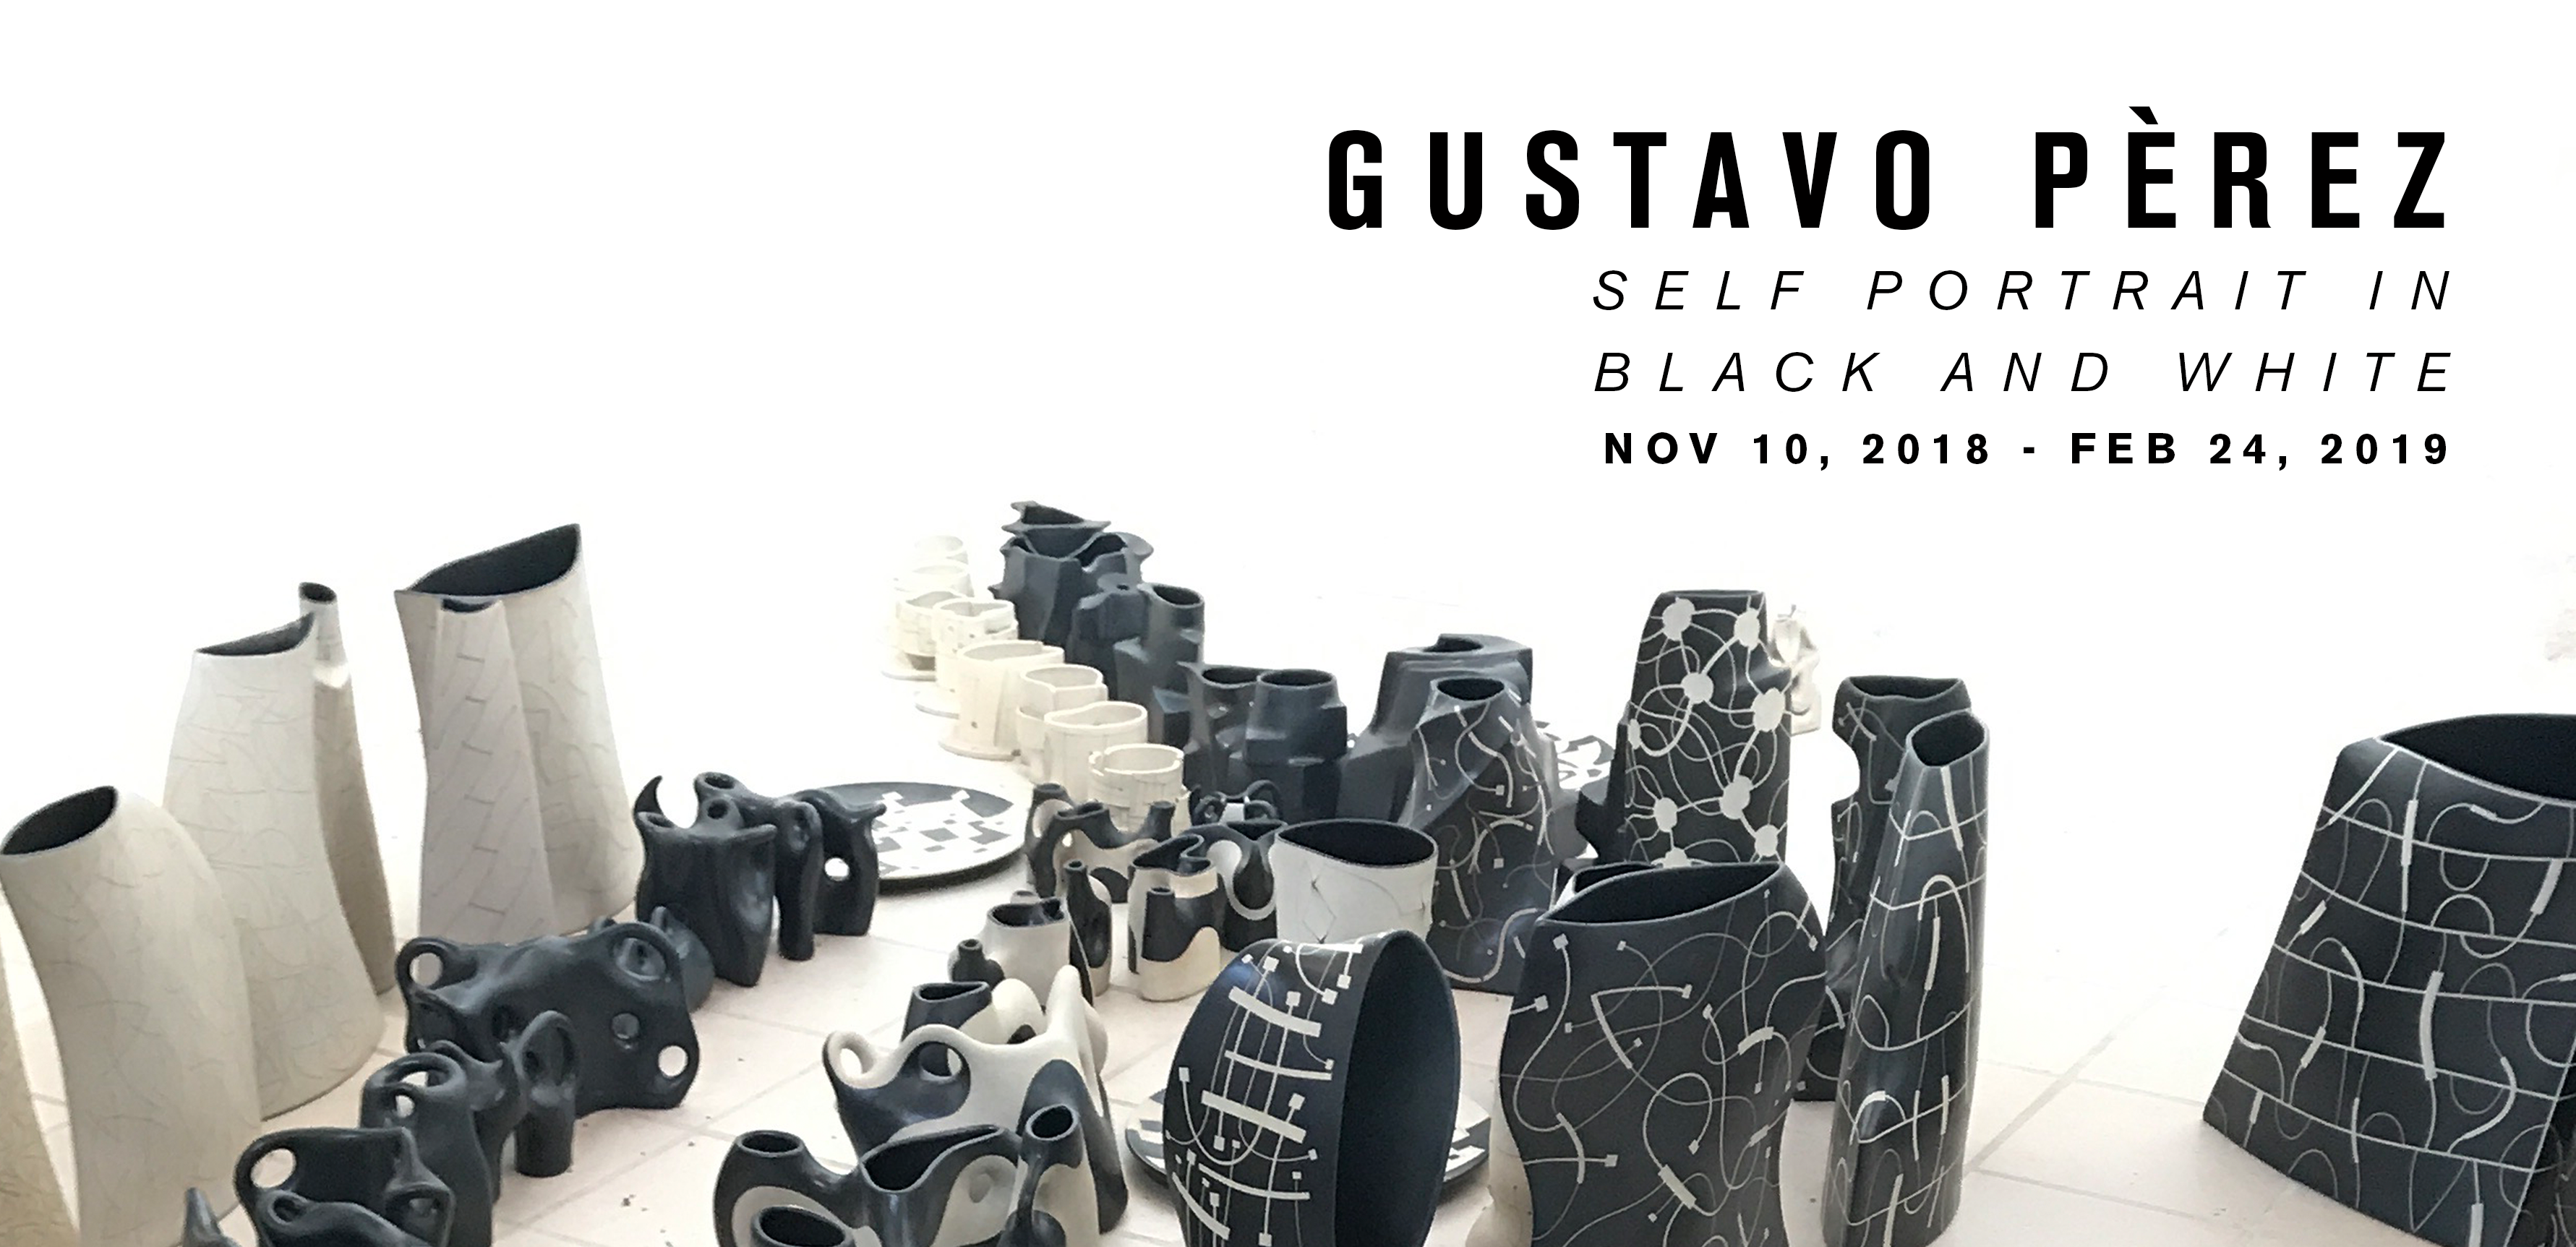 Gustavo Perez: Self Portrait in Black and White at the Museum of Craft and Design